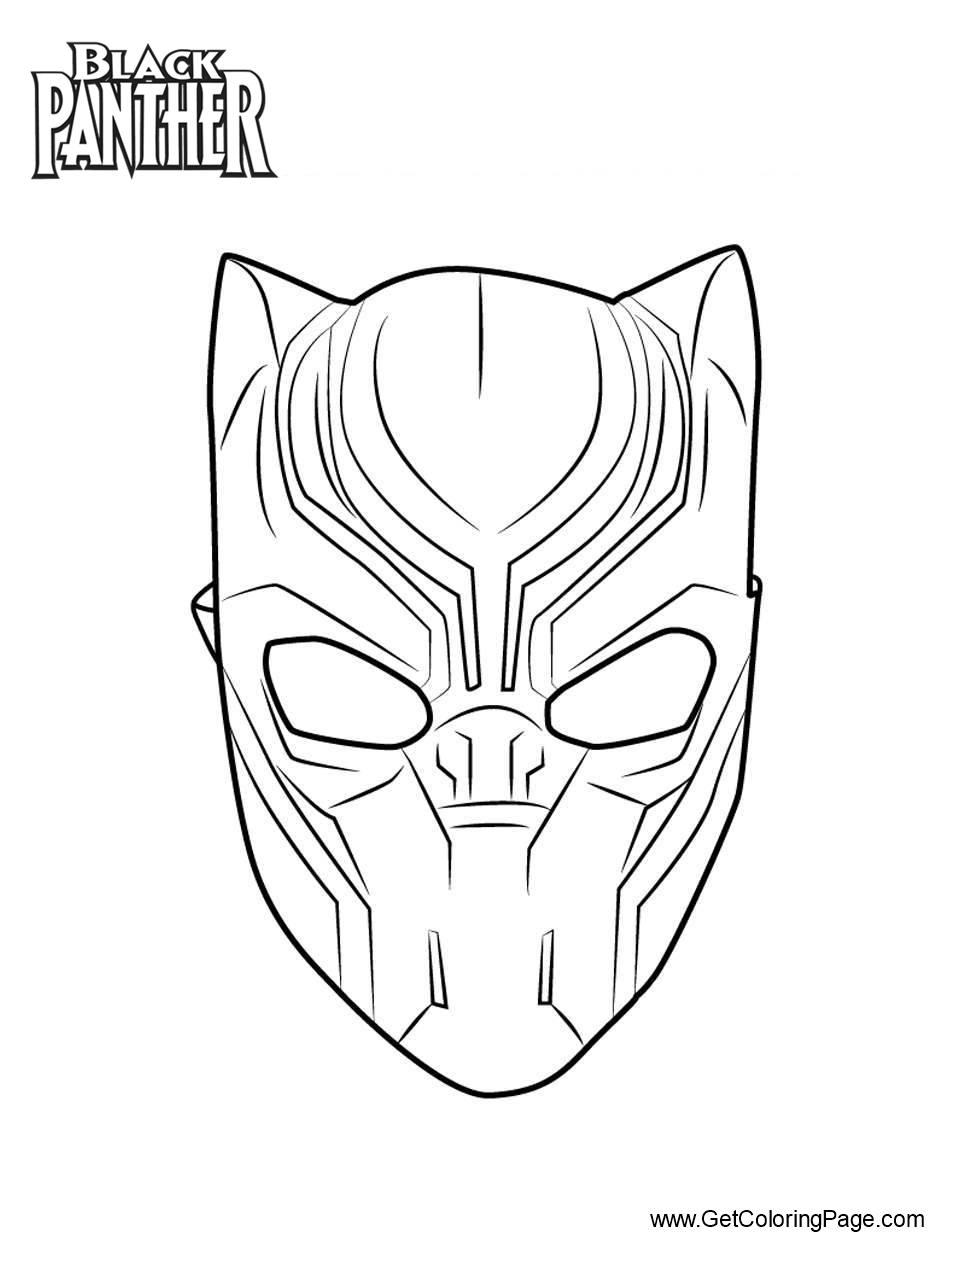 Black Panther Coloring Pages Free Printable Coloring Pages For Kids